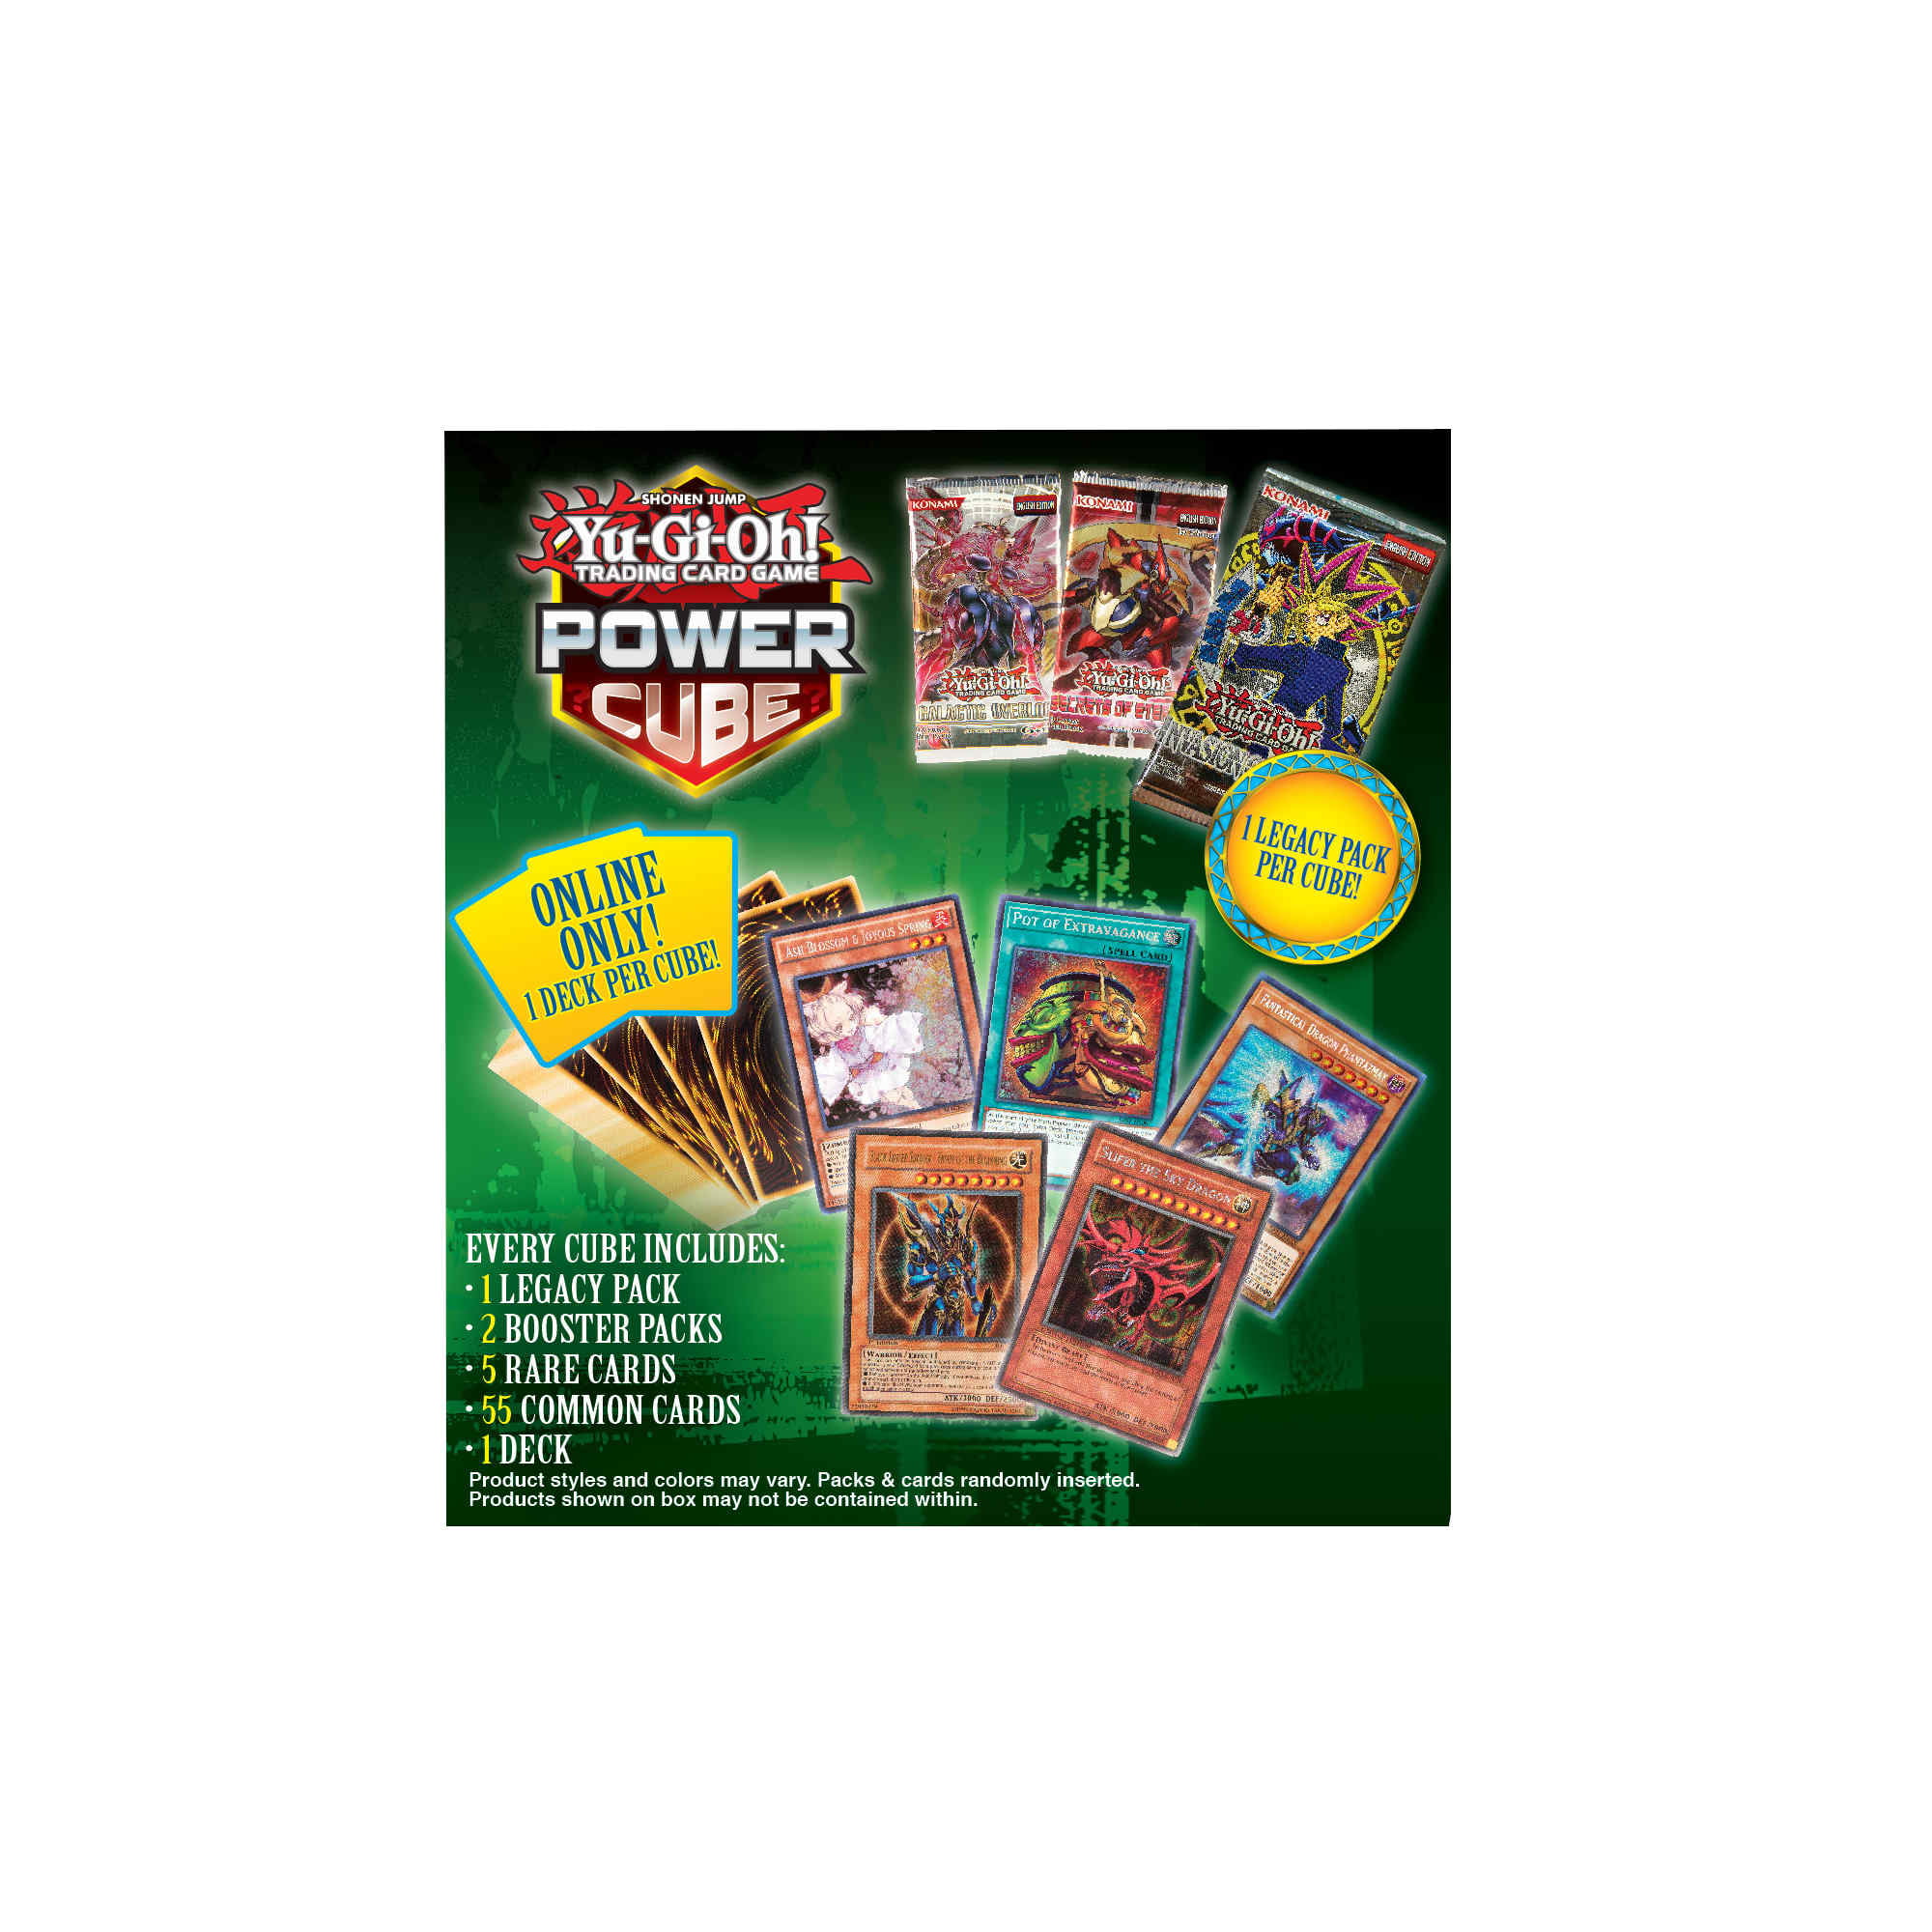 Yu Gi Oh Yugioh Power Cube 3 Online Exclusive 1 Deck Included 5 Rare Cards 2 Booster Packs Find Blue Eyes White Dragon Booster Packs Walmart Com Walmart Com